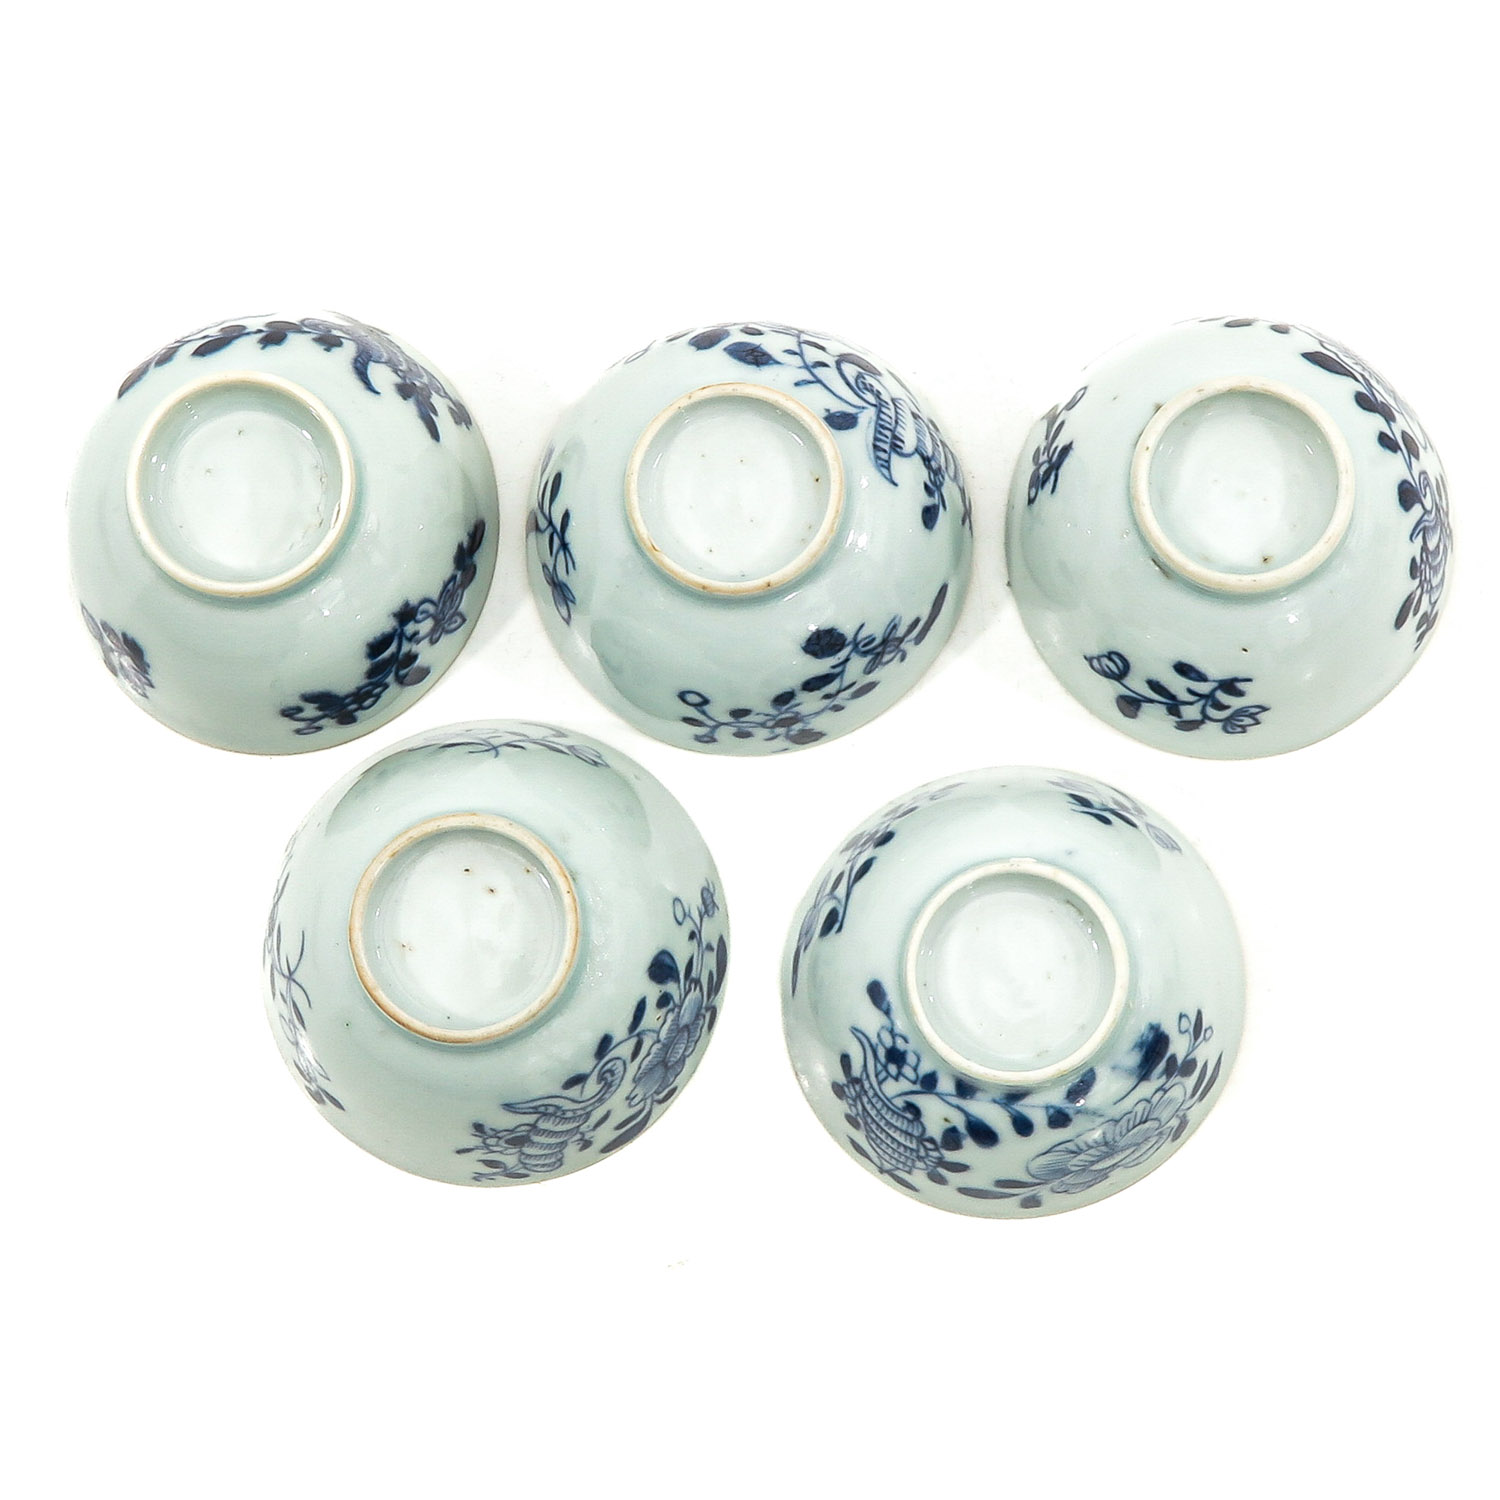 A Collection of 5 Blue and White Cups and Saucers - Image 6 of 10